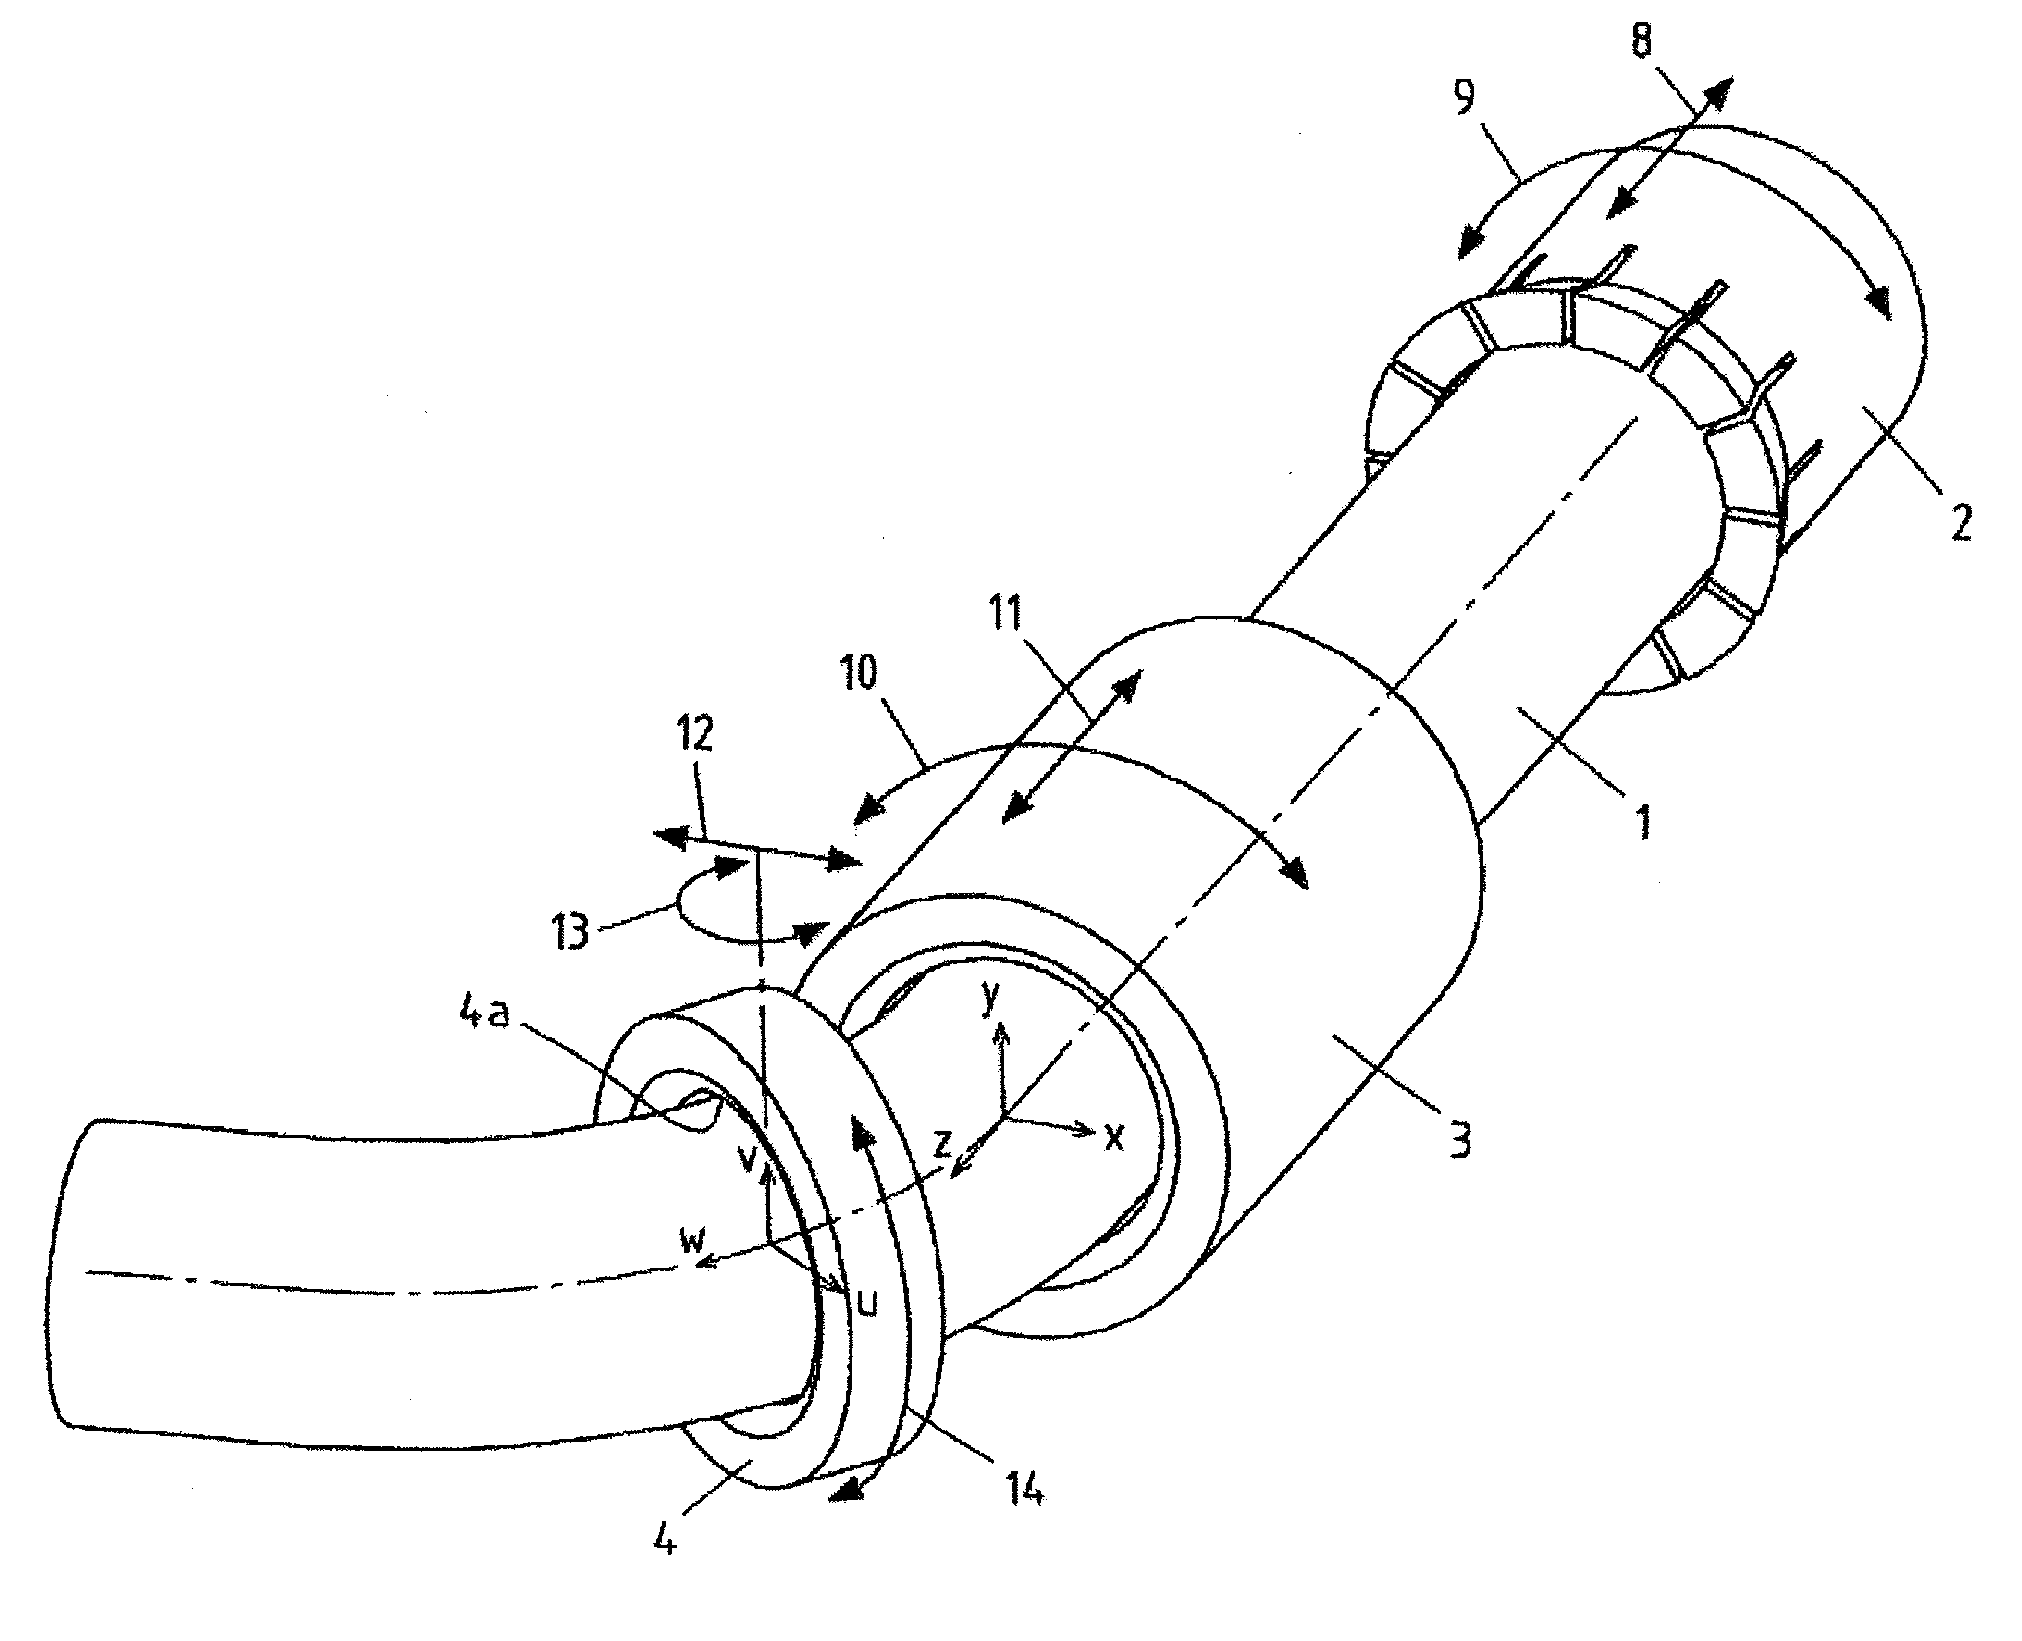 Device for the Free Forming and Bending of Longitudinal Profiles, Particularly Pipes, and a Combined Device for Free Forming and Bending As Well As Draw-Bending Longitudinal Profiles, Particularly Pipes